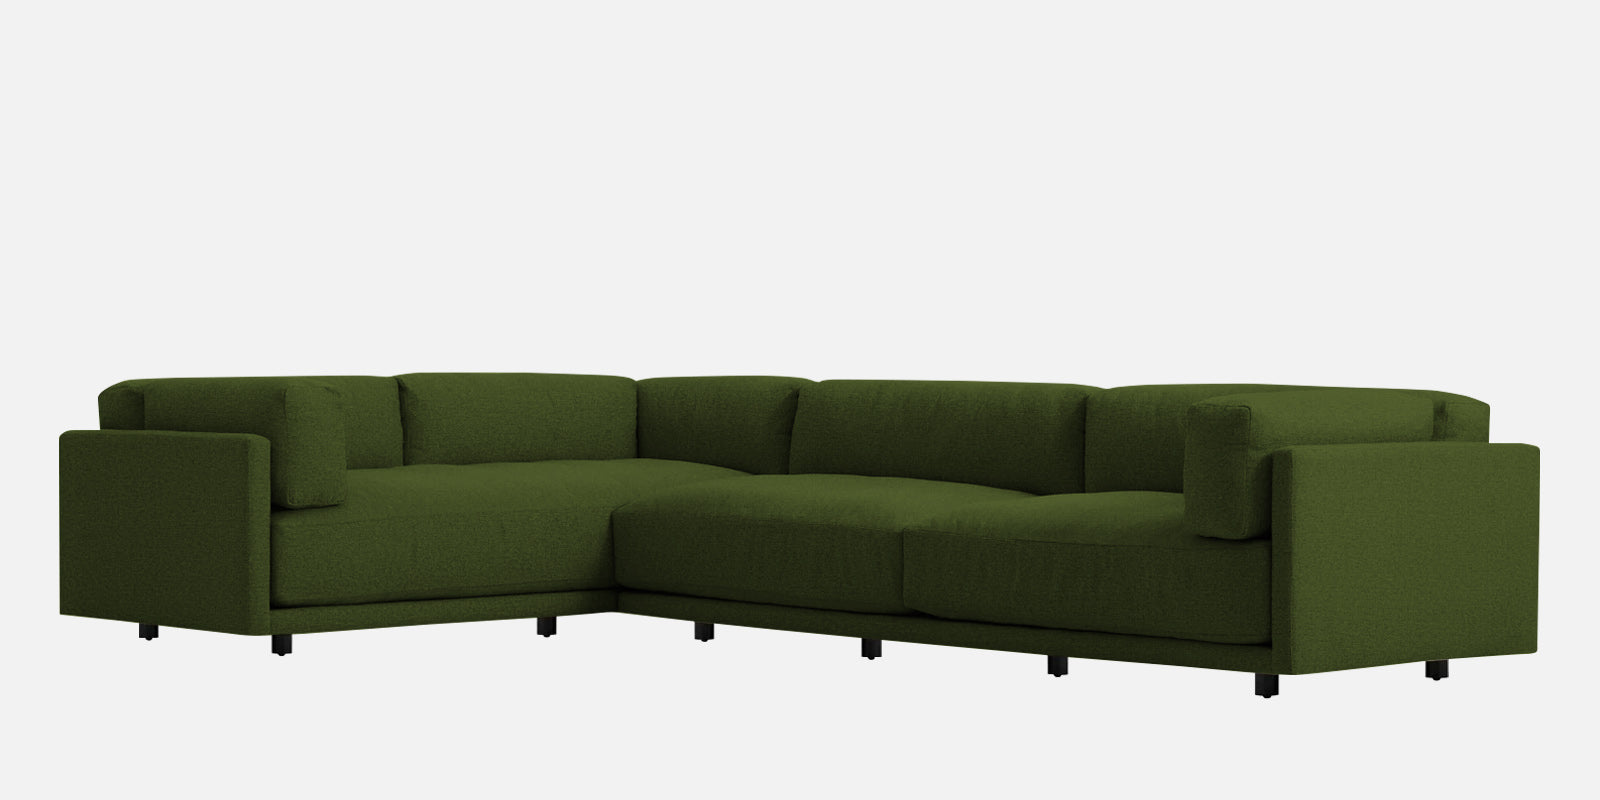 Nixon Fabric 6 Seater RHS Sectional Sofa In Olive Green Colour